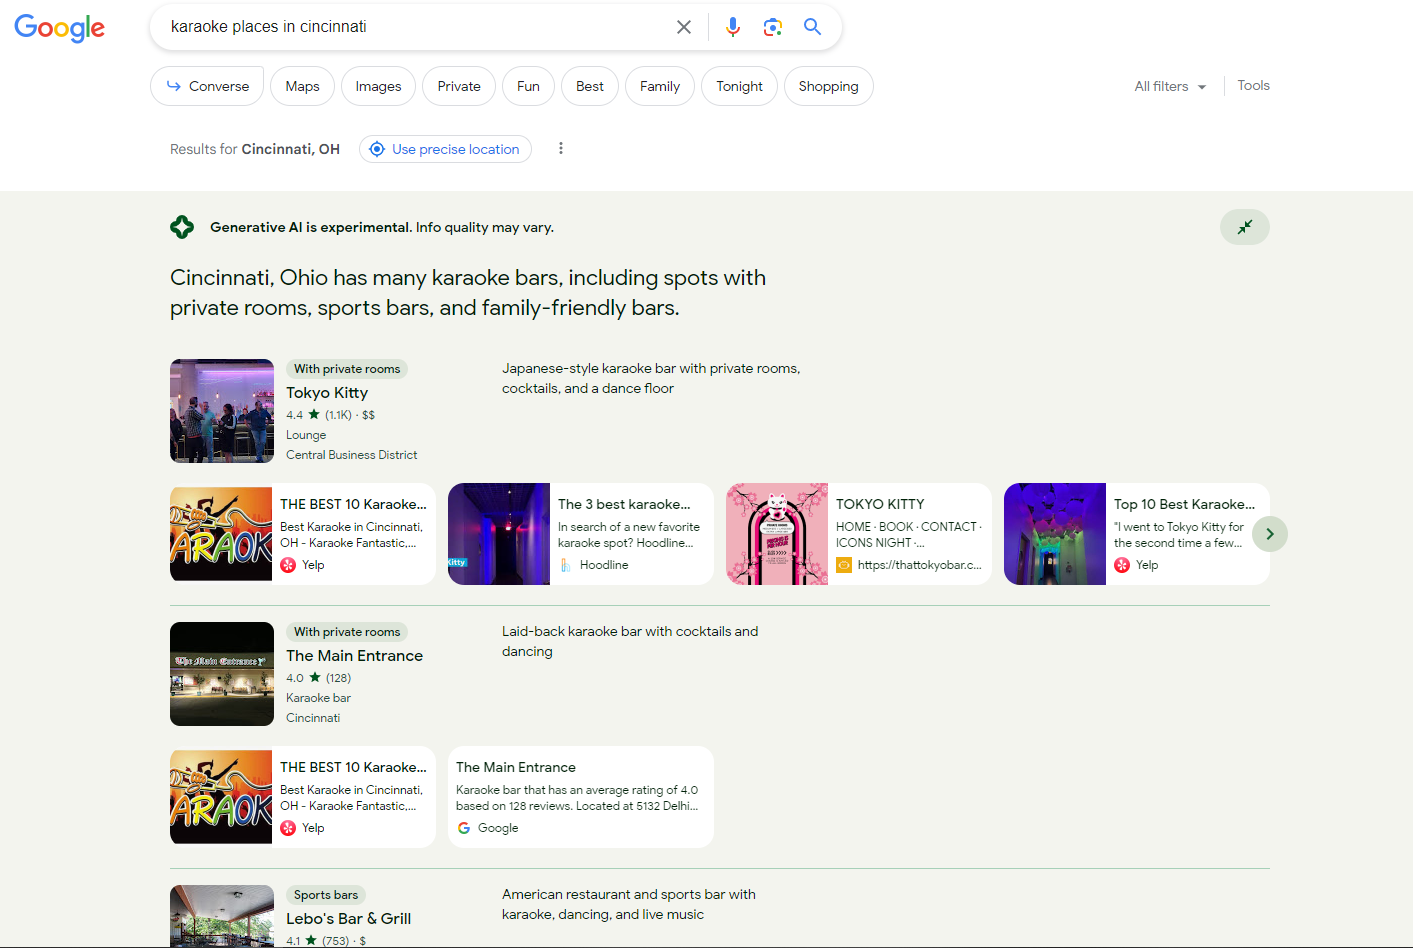 a desktop Google search for ‘karaoke places in cincinnati’ returns a generative AI response that lists one result called Tokyo Kitty categorized as ‘with private rooms’ followed by a carousel of links that likely explains more about Tokyo Kitty. The same treatment is applied to another business result with two articles referencing it